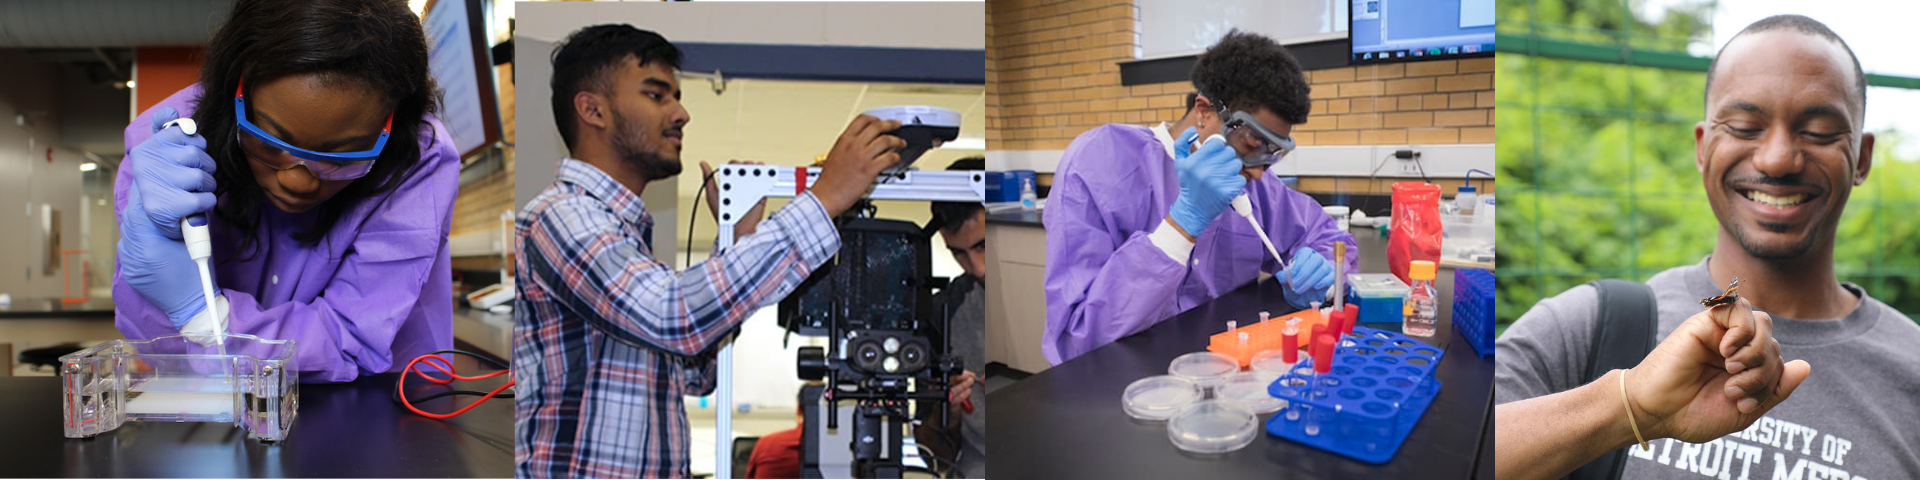 header showing students conducting research